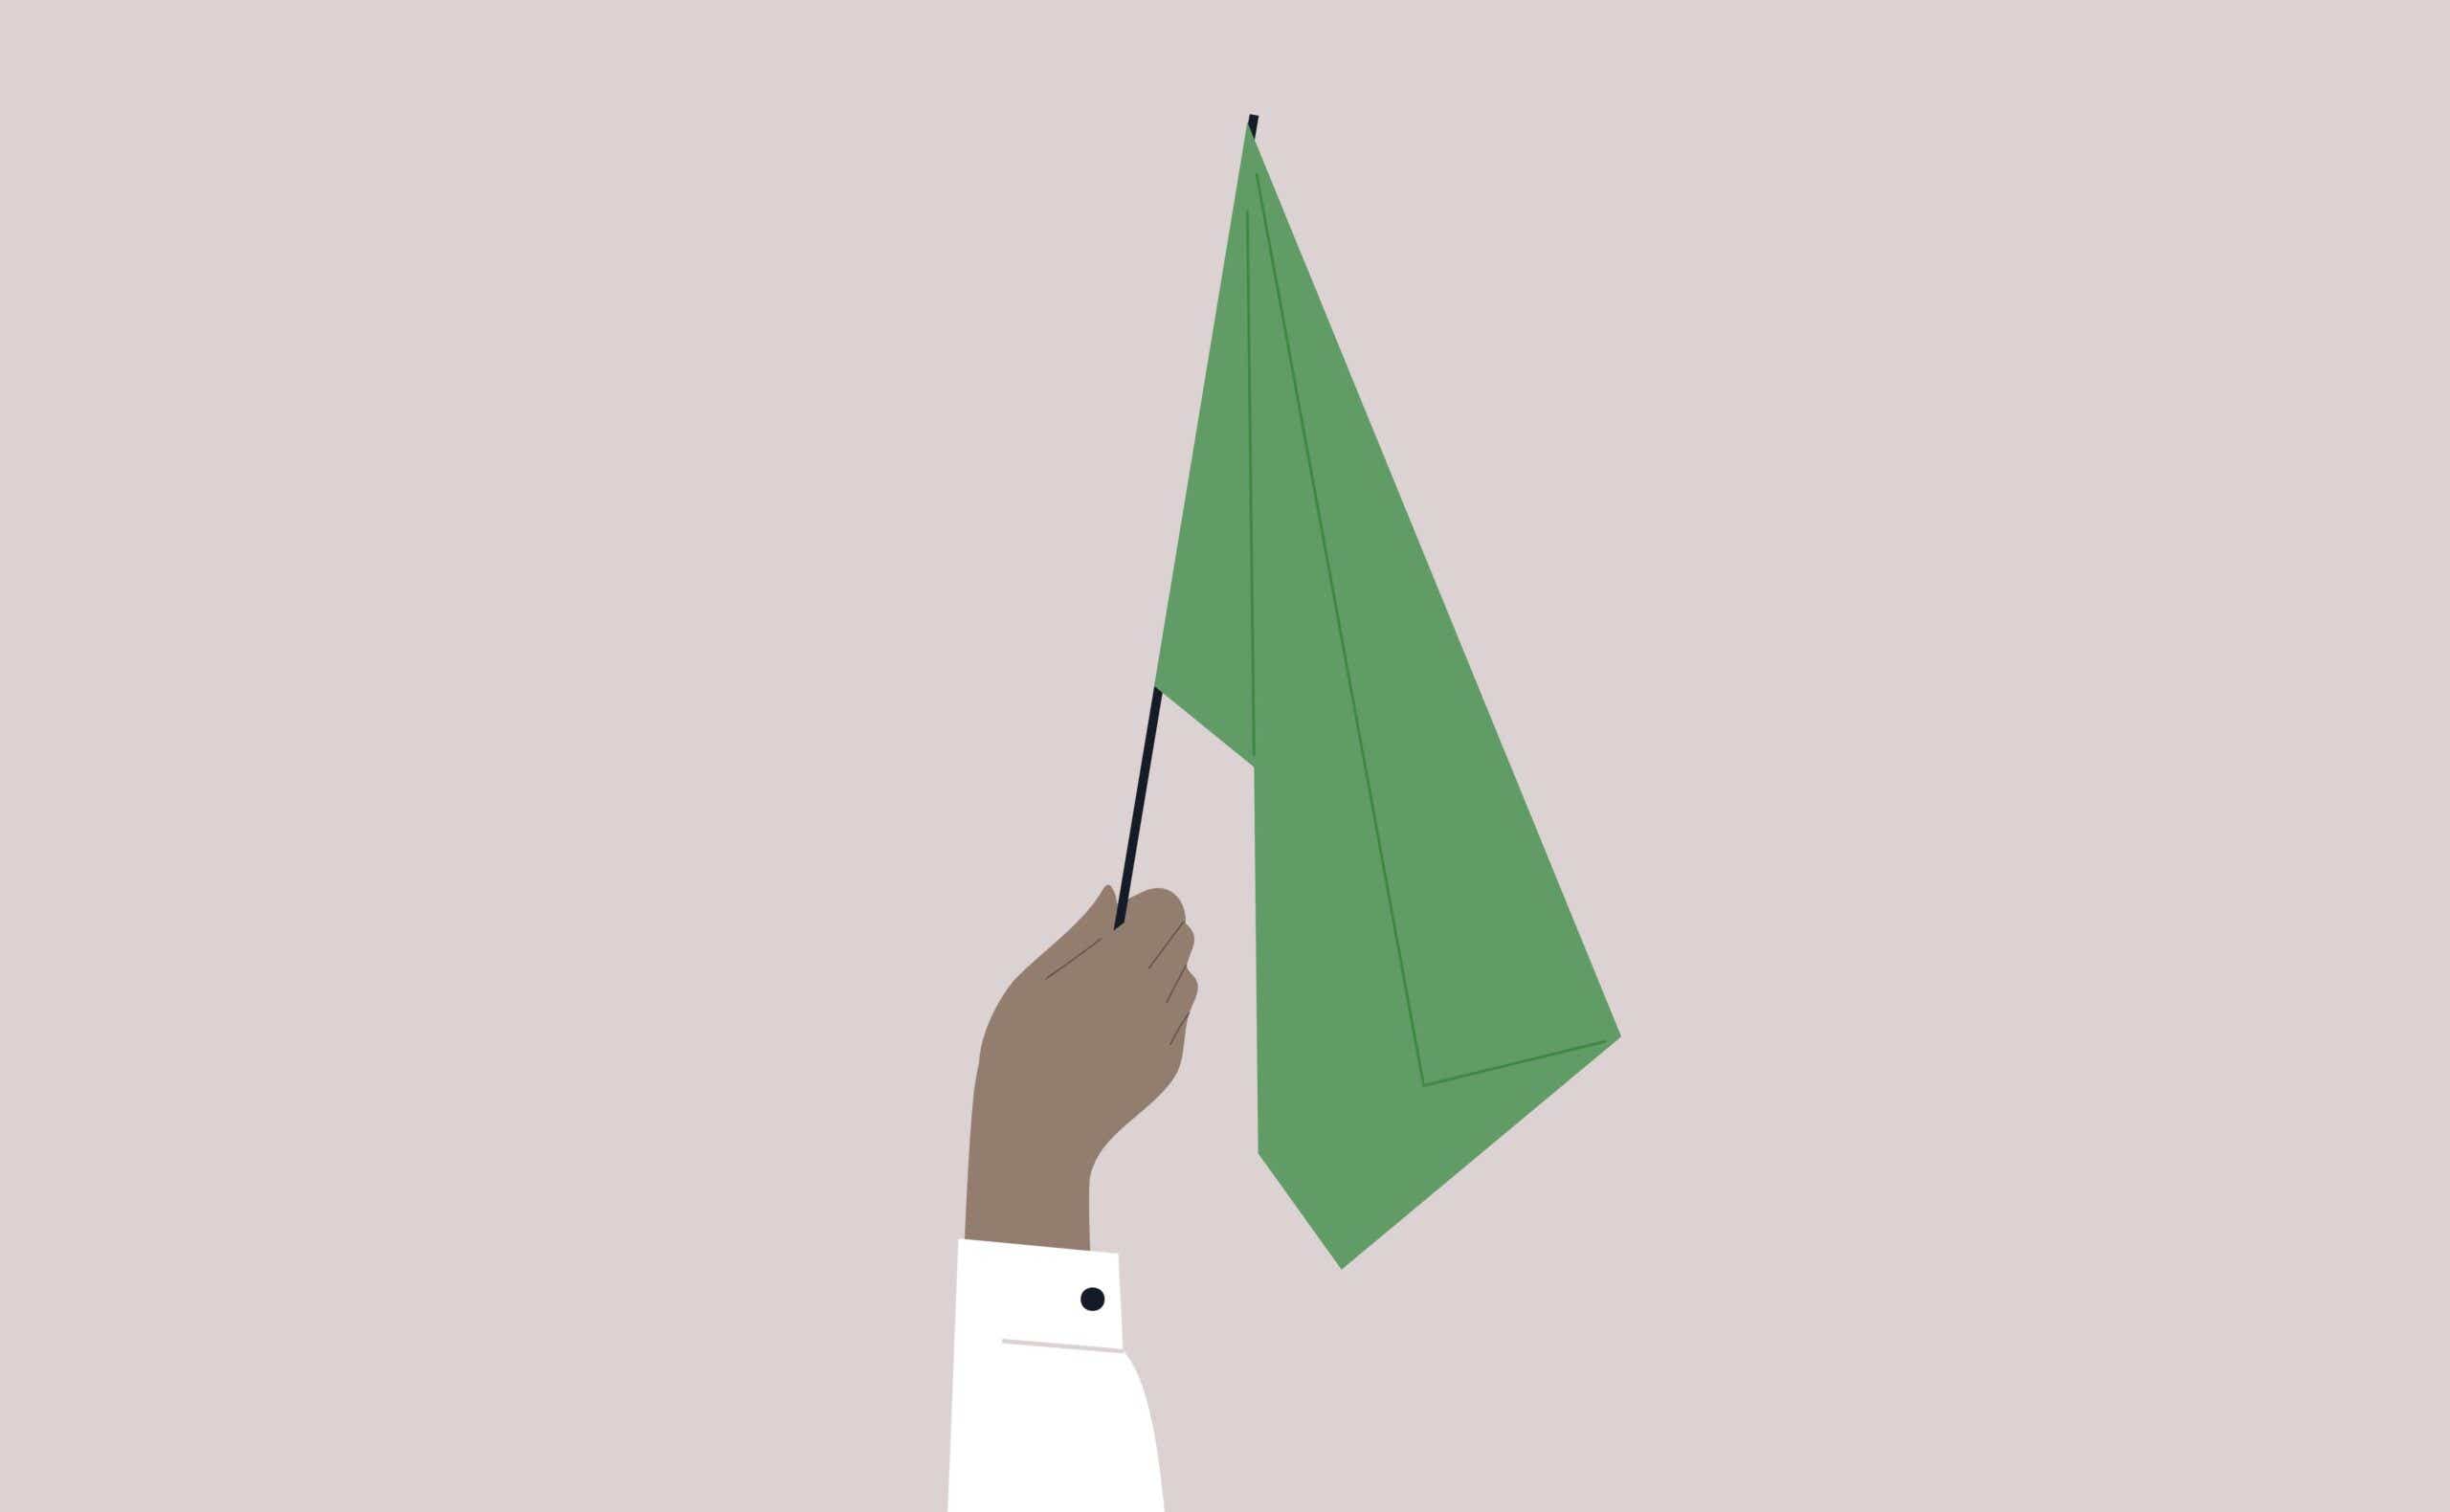 Illustrated hand holding green flag